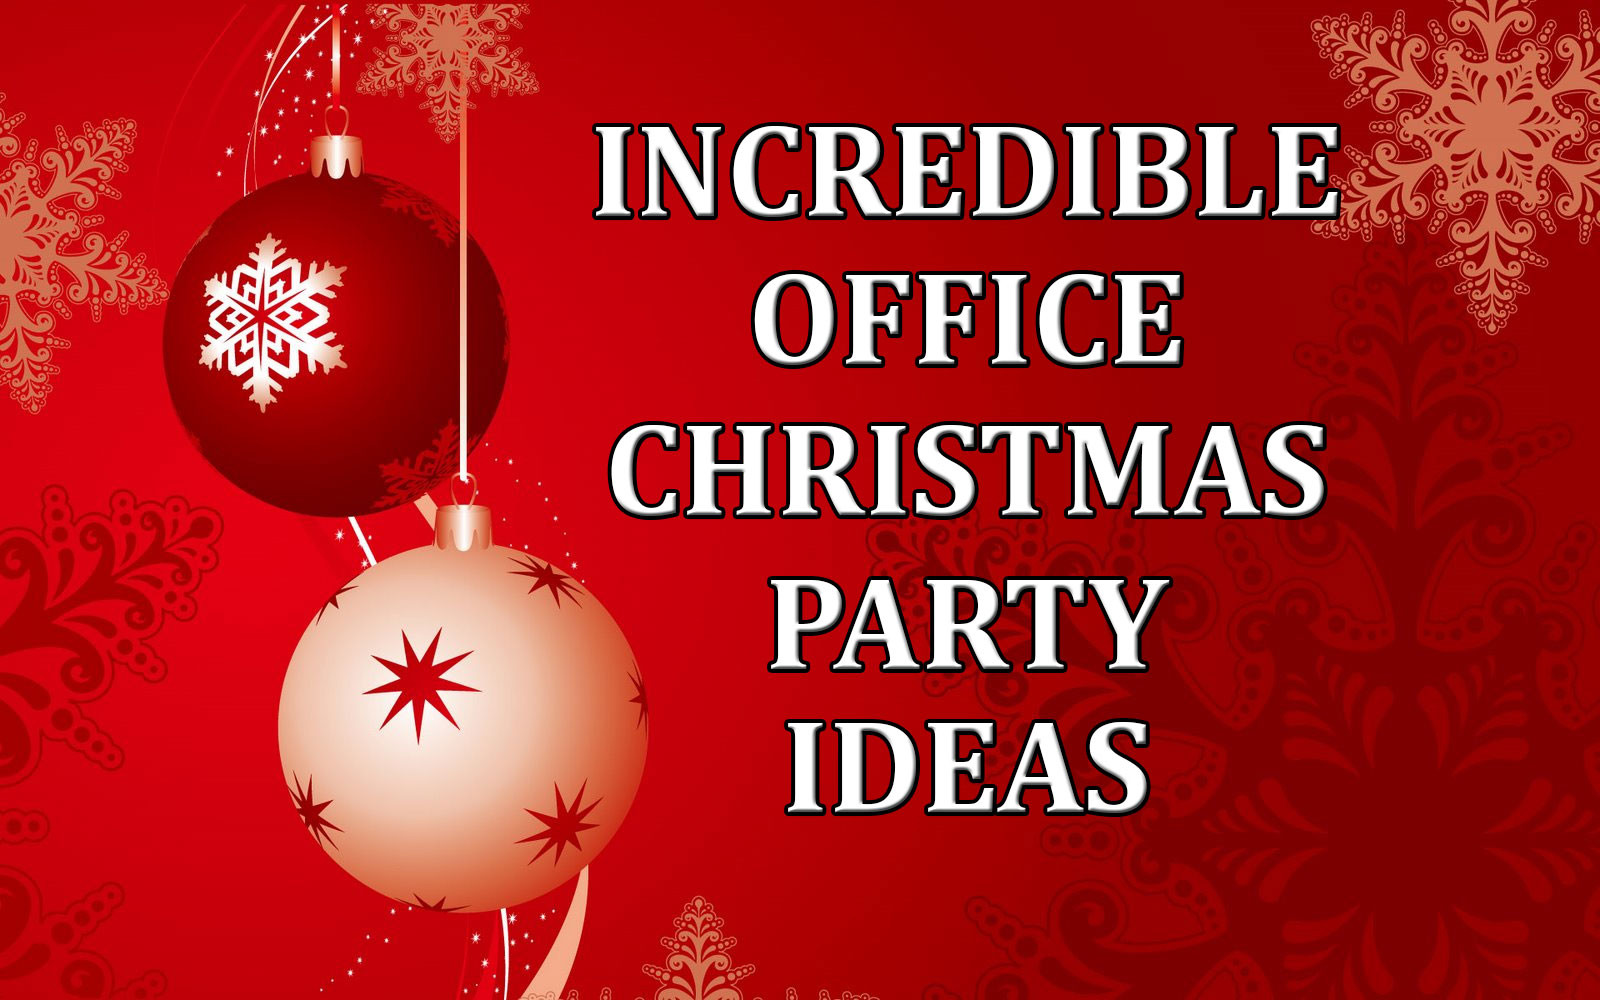 Ideas For Company Christmas Party
 Incredible fice Christmas Party Ideas edy Ventriloquist